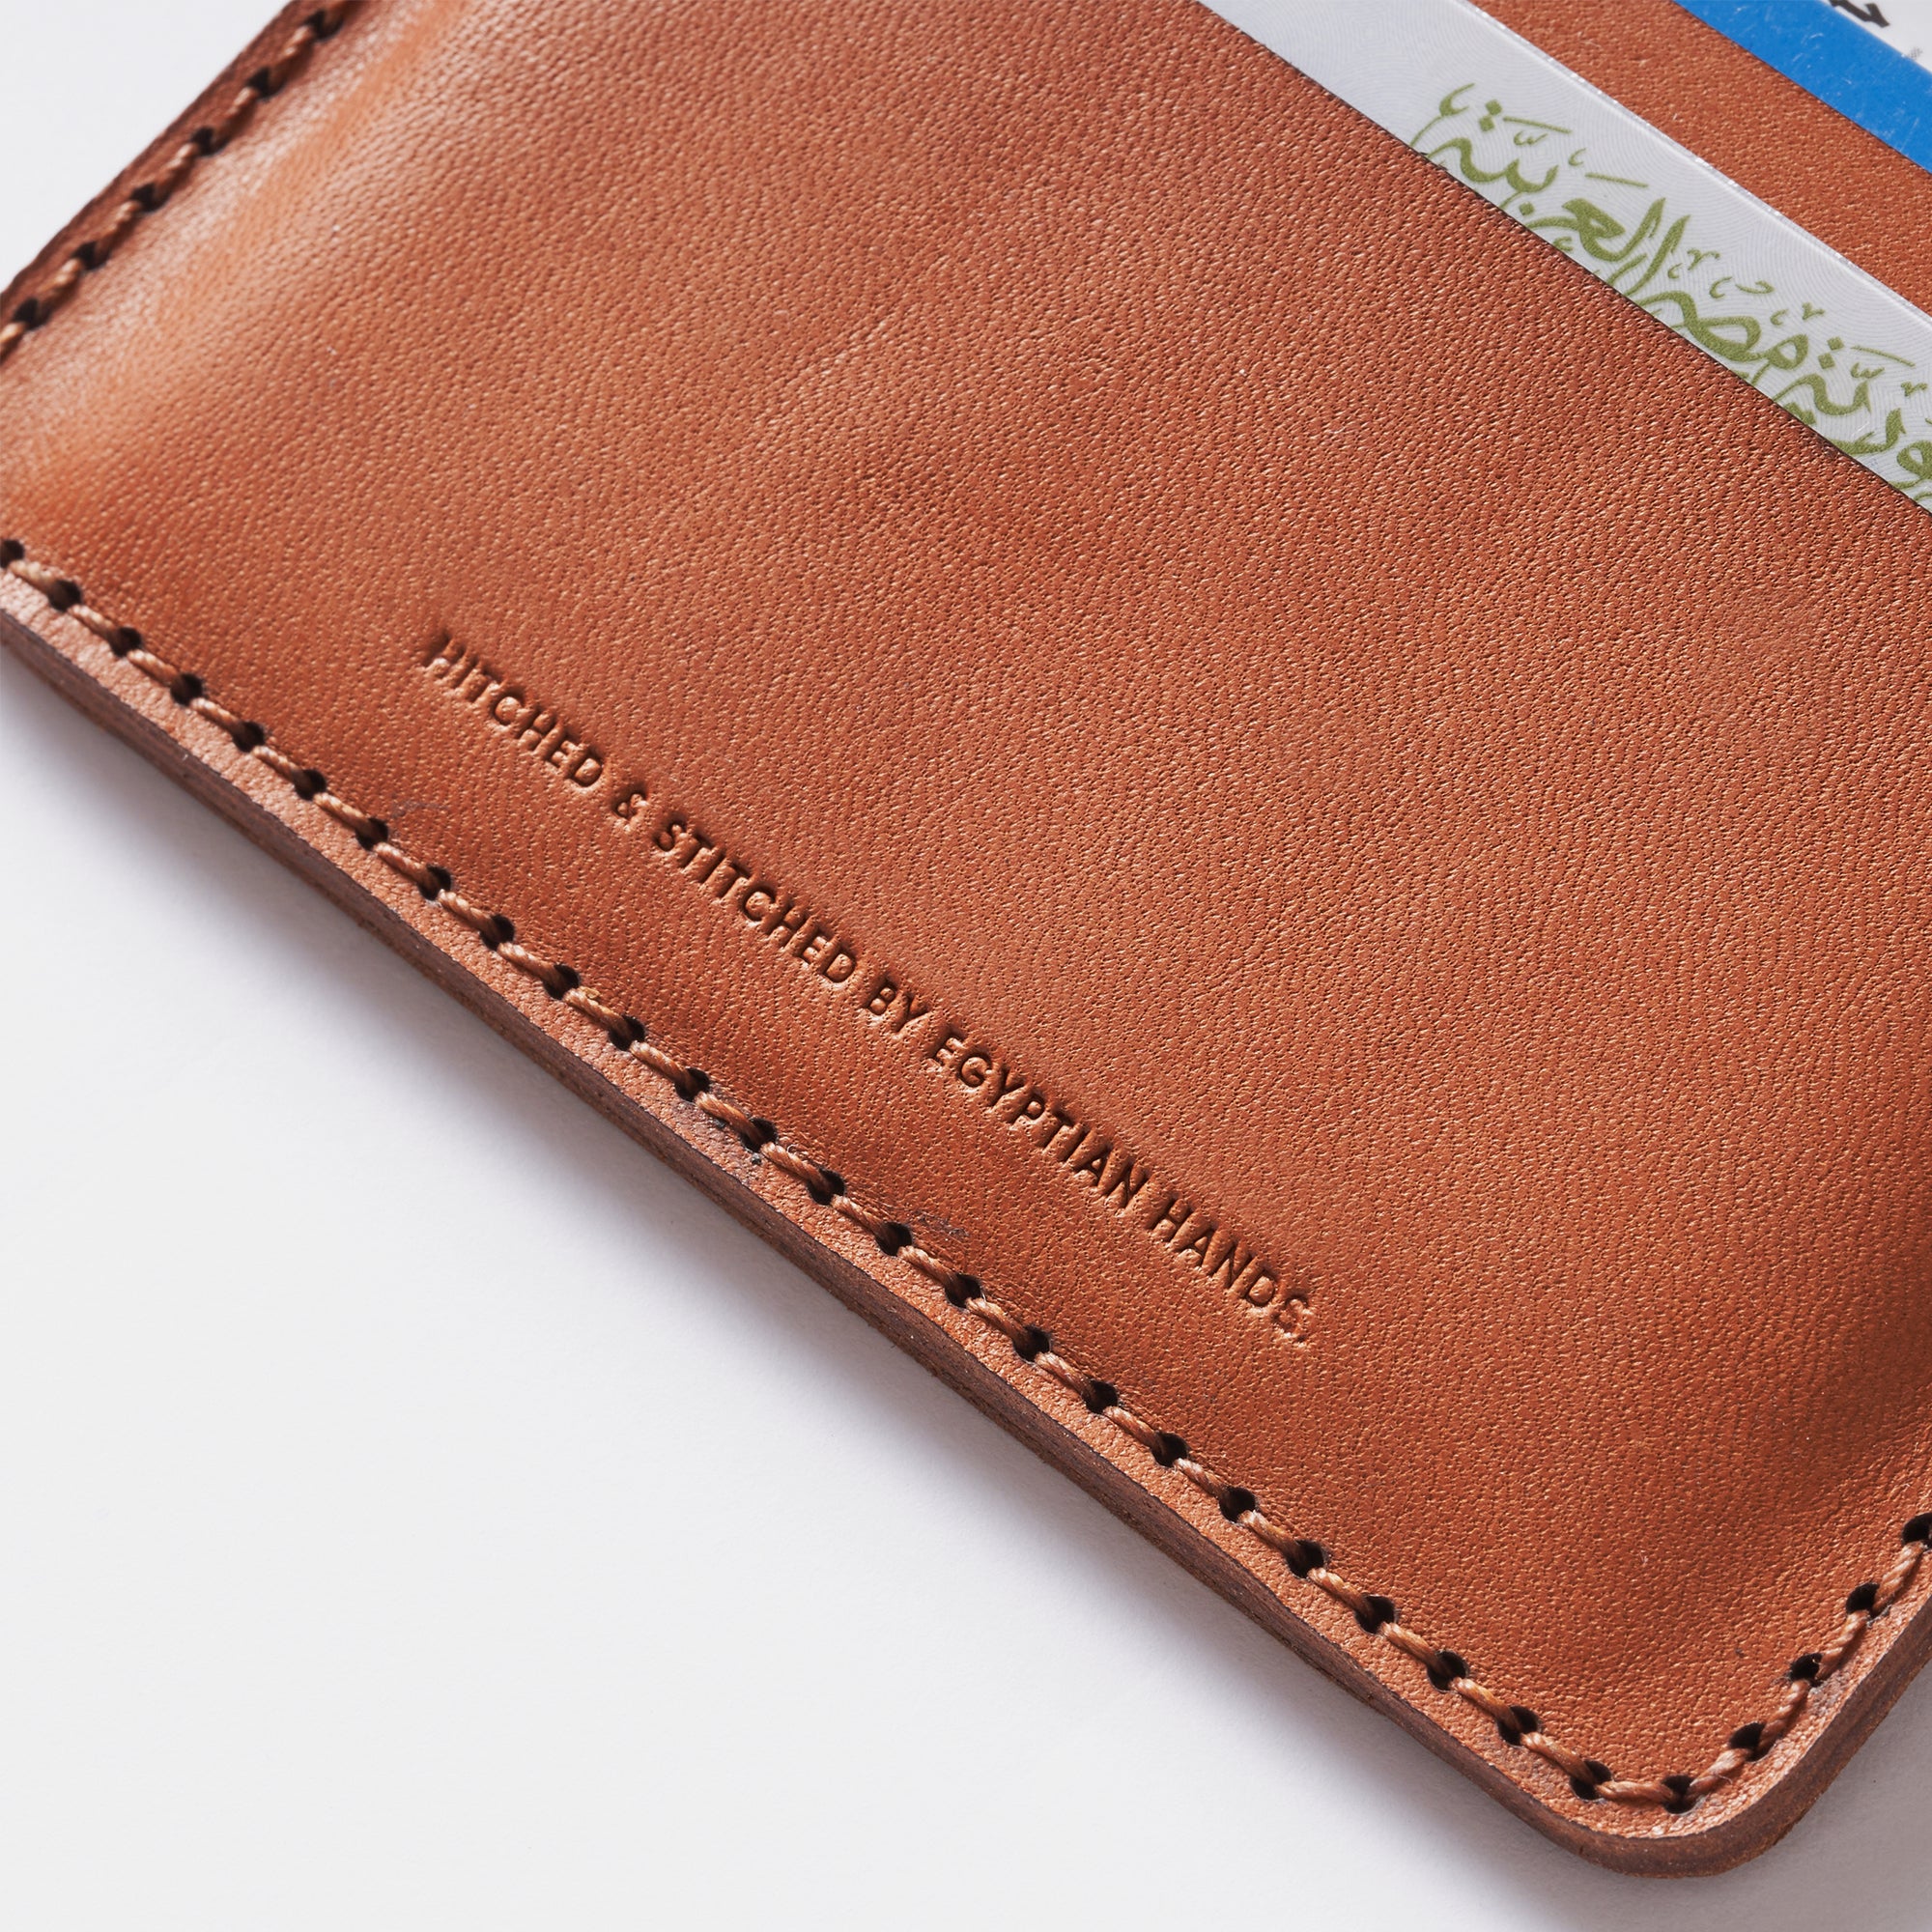 Close-up of a brown leather bifold wallet with stitching detail and embossed text.